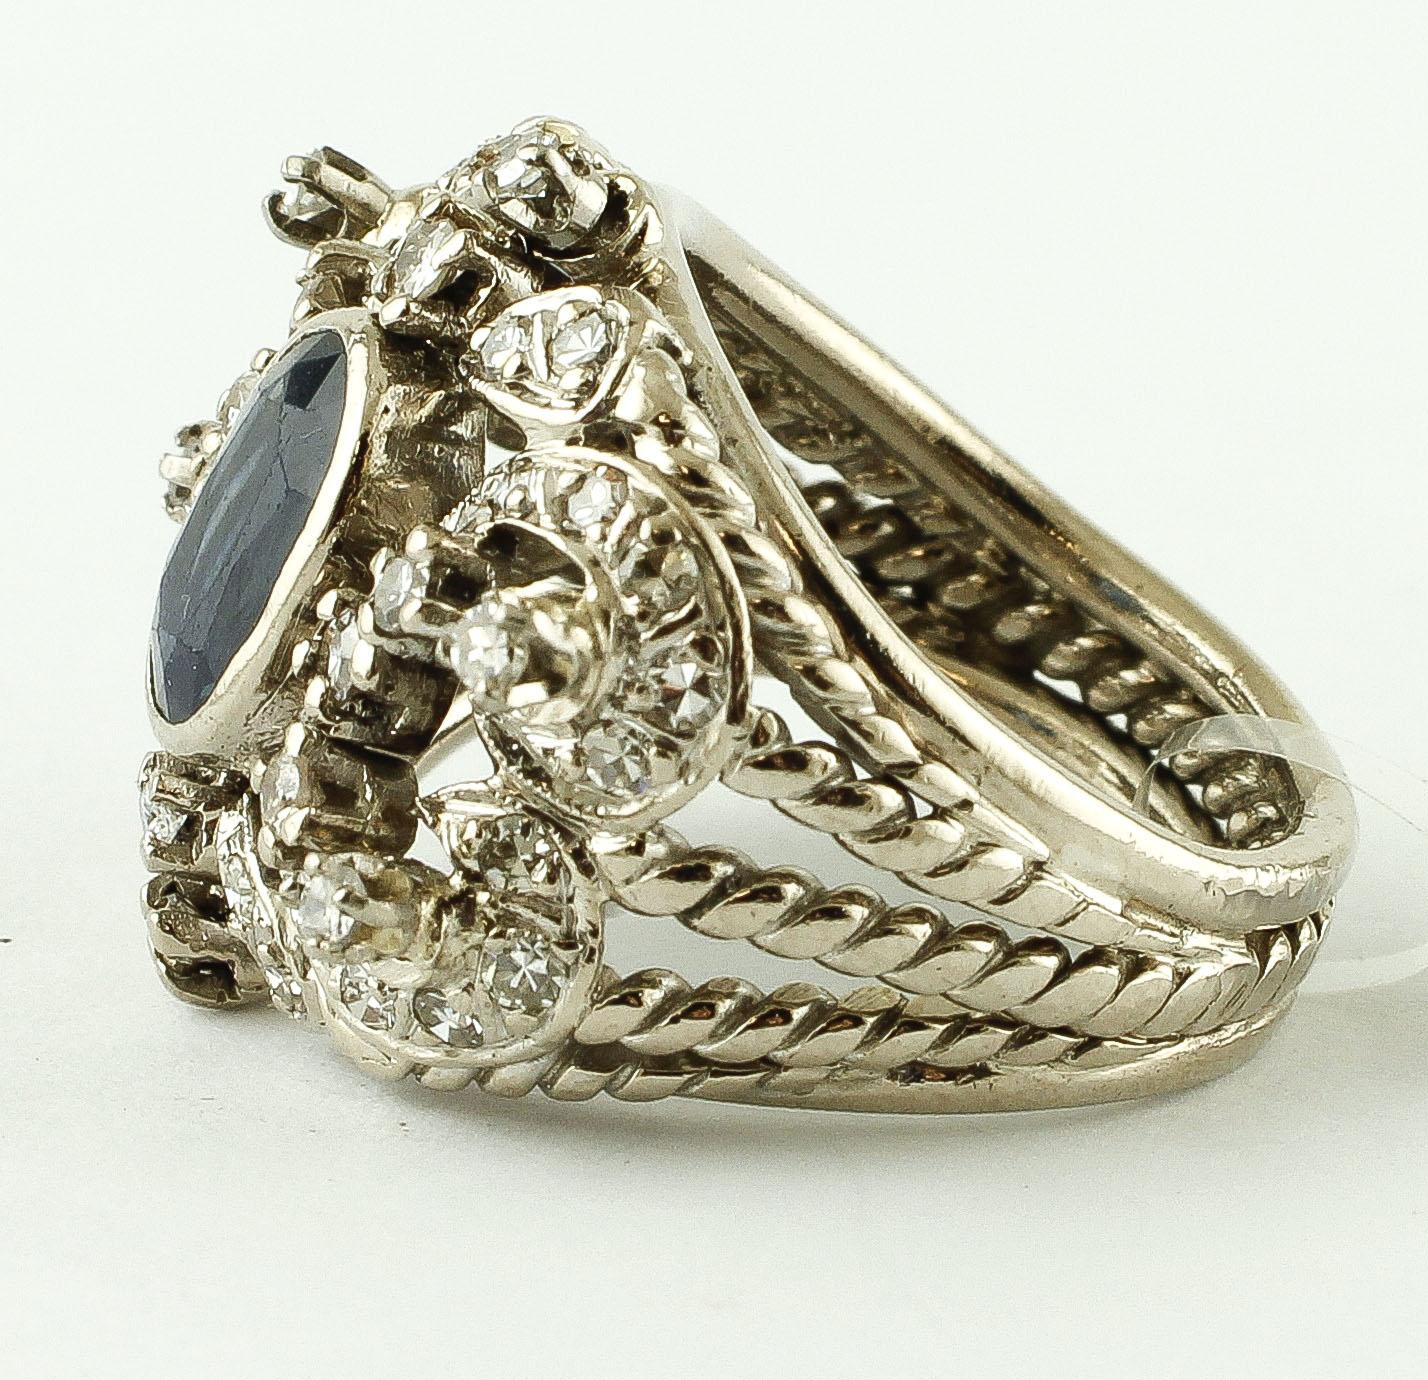 SHIPPING POLICY:
No additional costs will be added to this order.
Shipping costs will be totally covered by the seller (customs duties included).

Vintage ring in 12k white gold structure, mounted with a 2.80 ct blue sapphire in the centre,